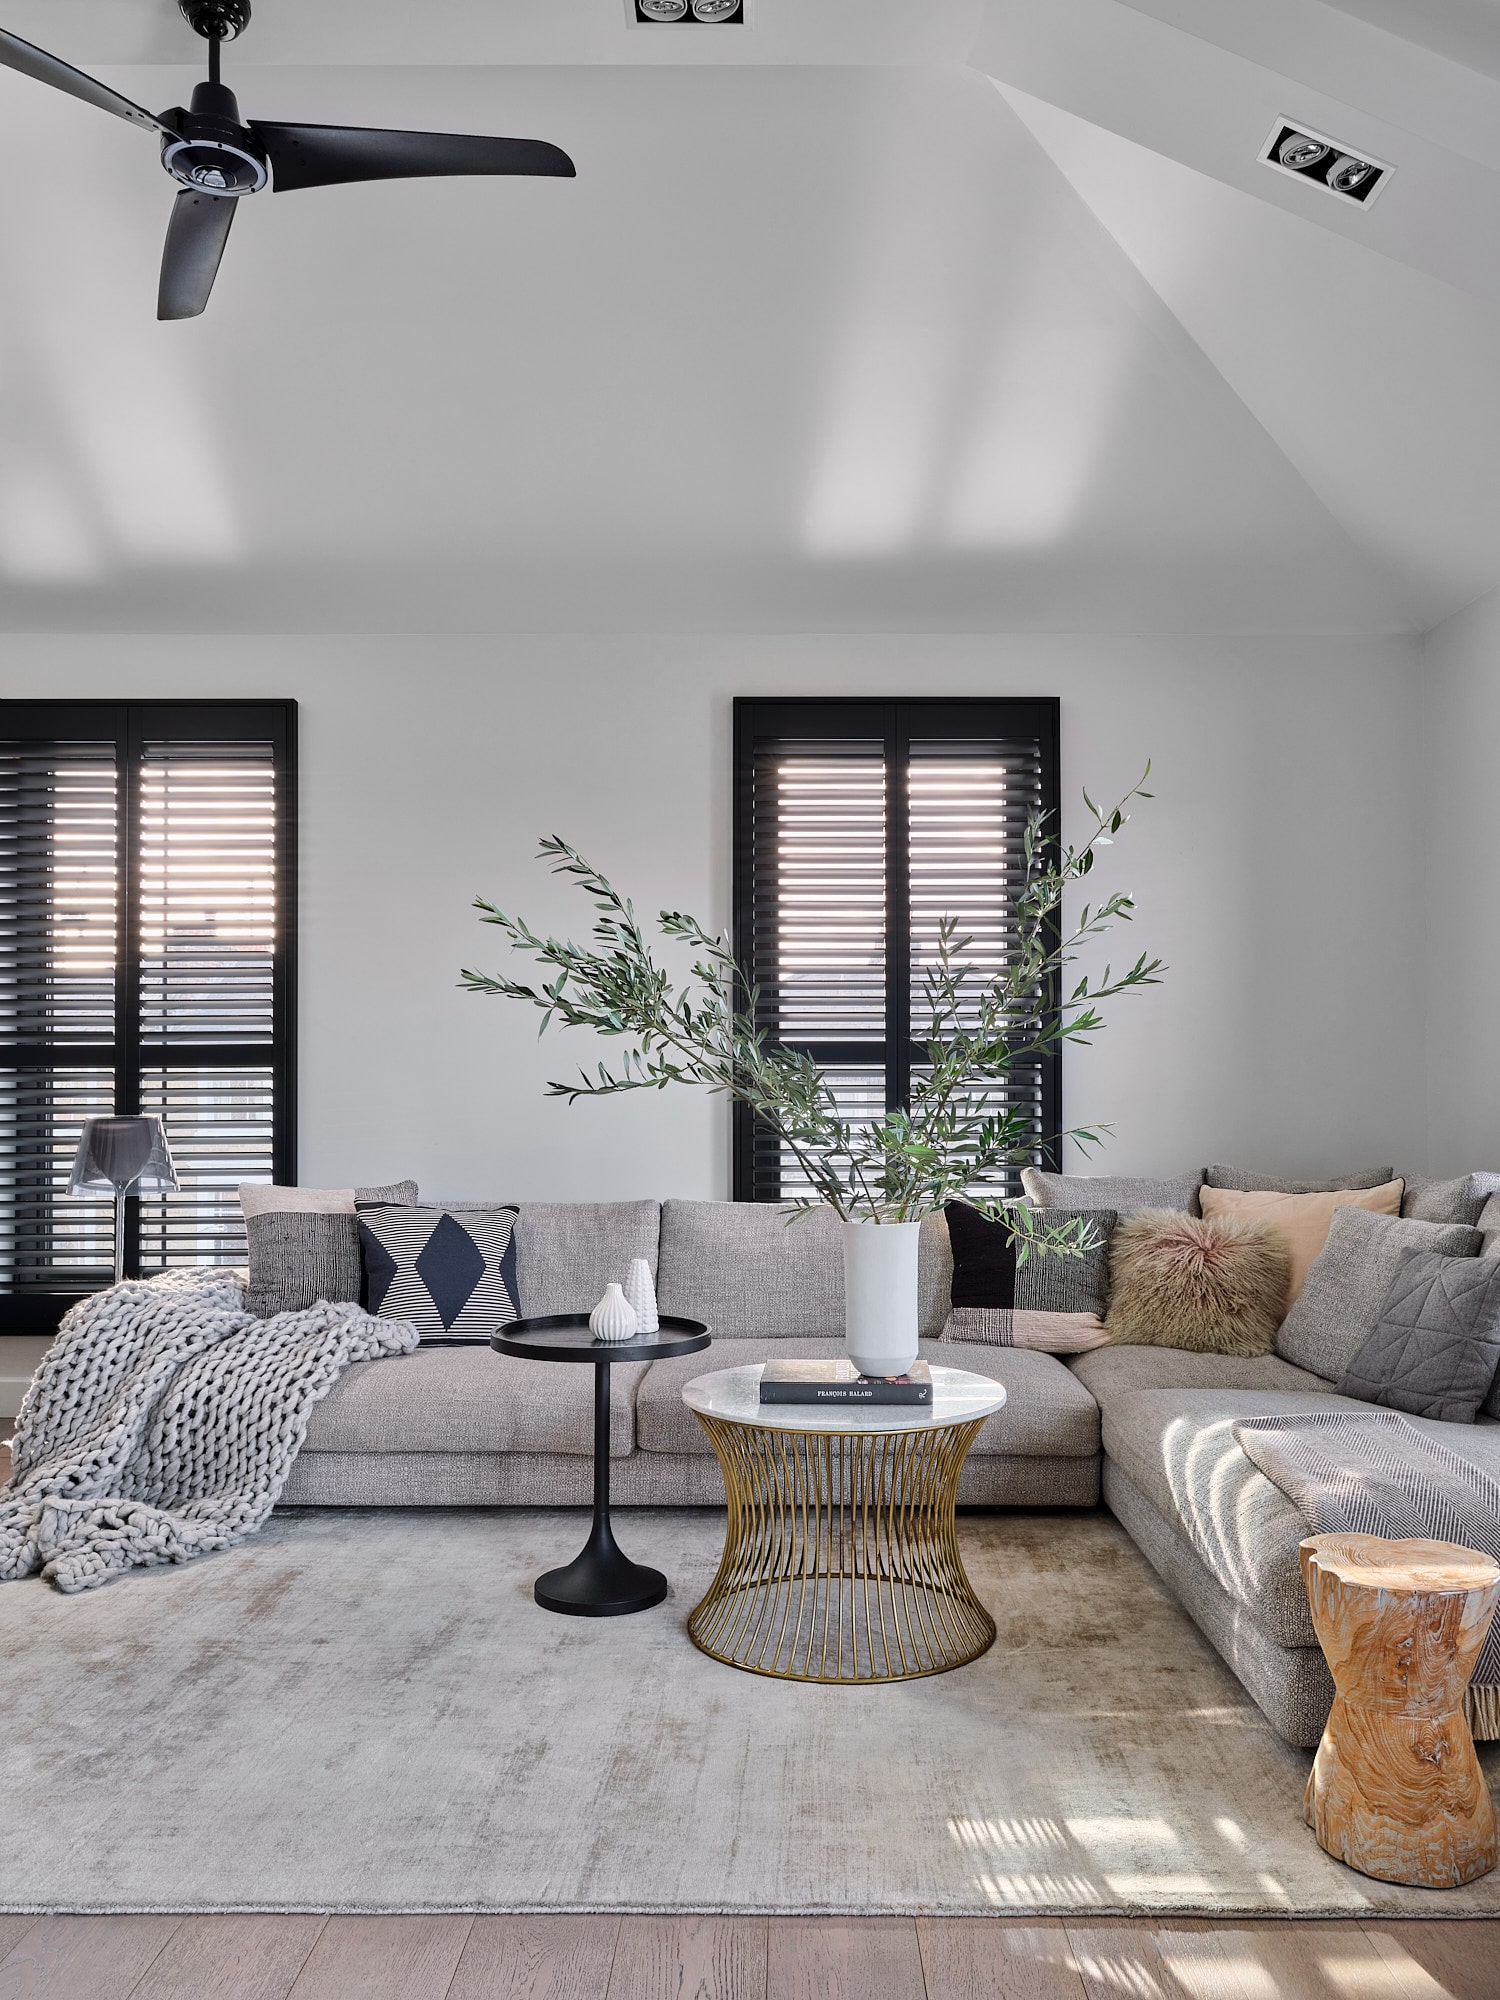 Living room with white walls, black shutters, sofa, two round coffee tables